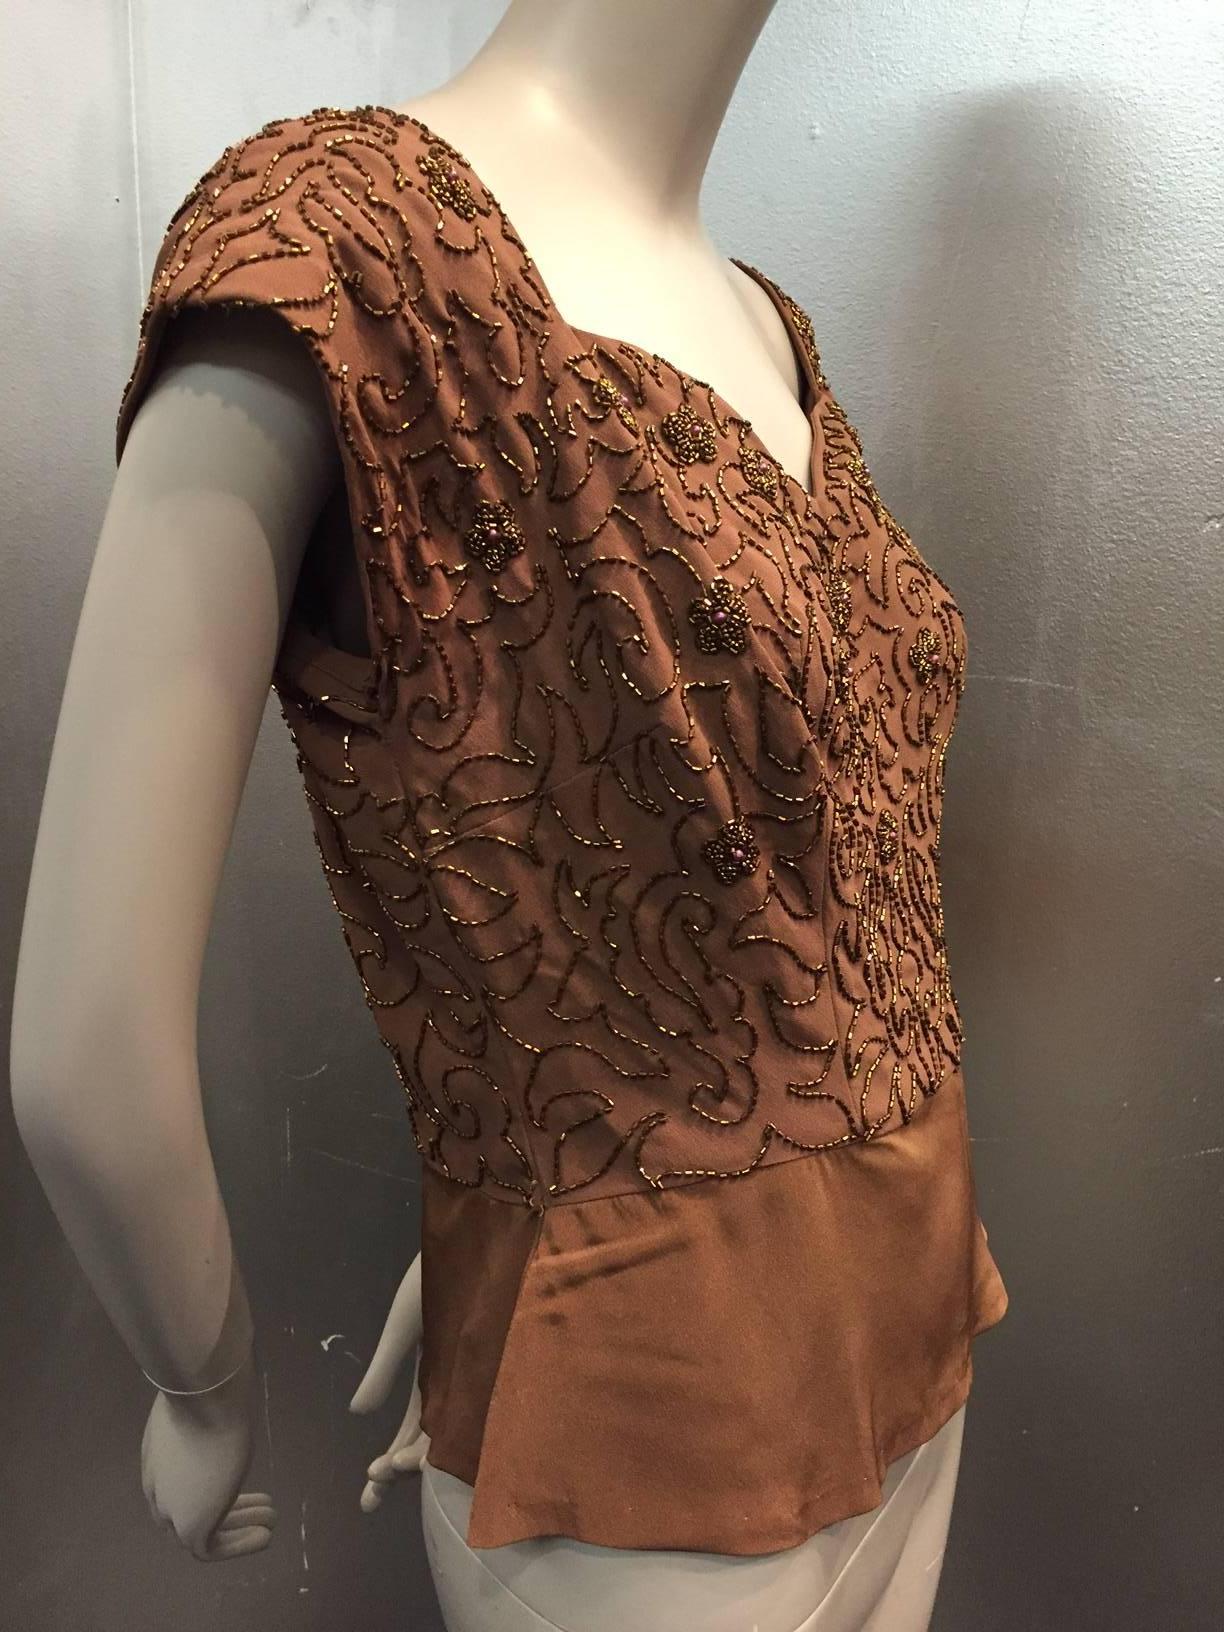 A beautiful 1950s rayon crepe evening blouse:  Mocha brown blouse with sweetheart neckline and cap sleeves entirely covered in elaborate copper beading. Short, unadorned hem is meant to be tucked in but can be worn out for a modern twist. Side